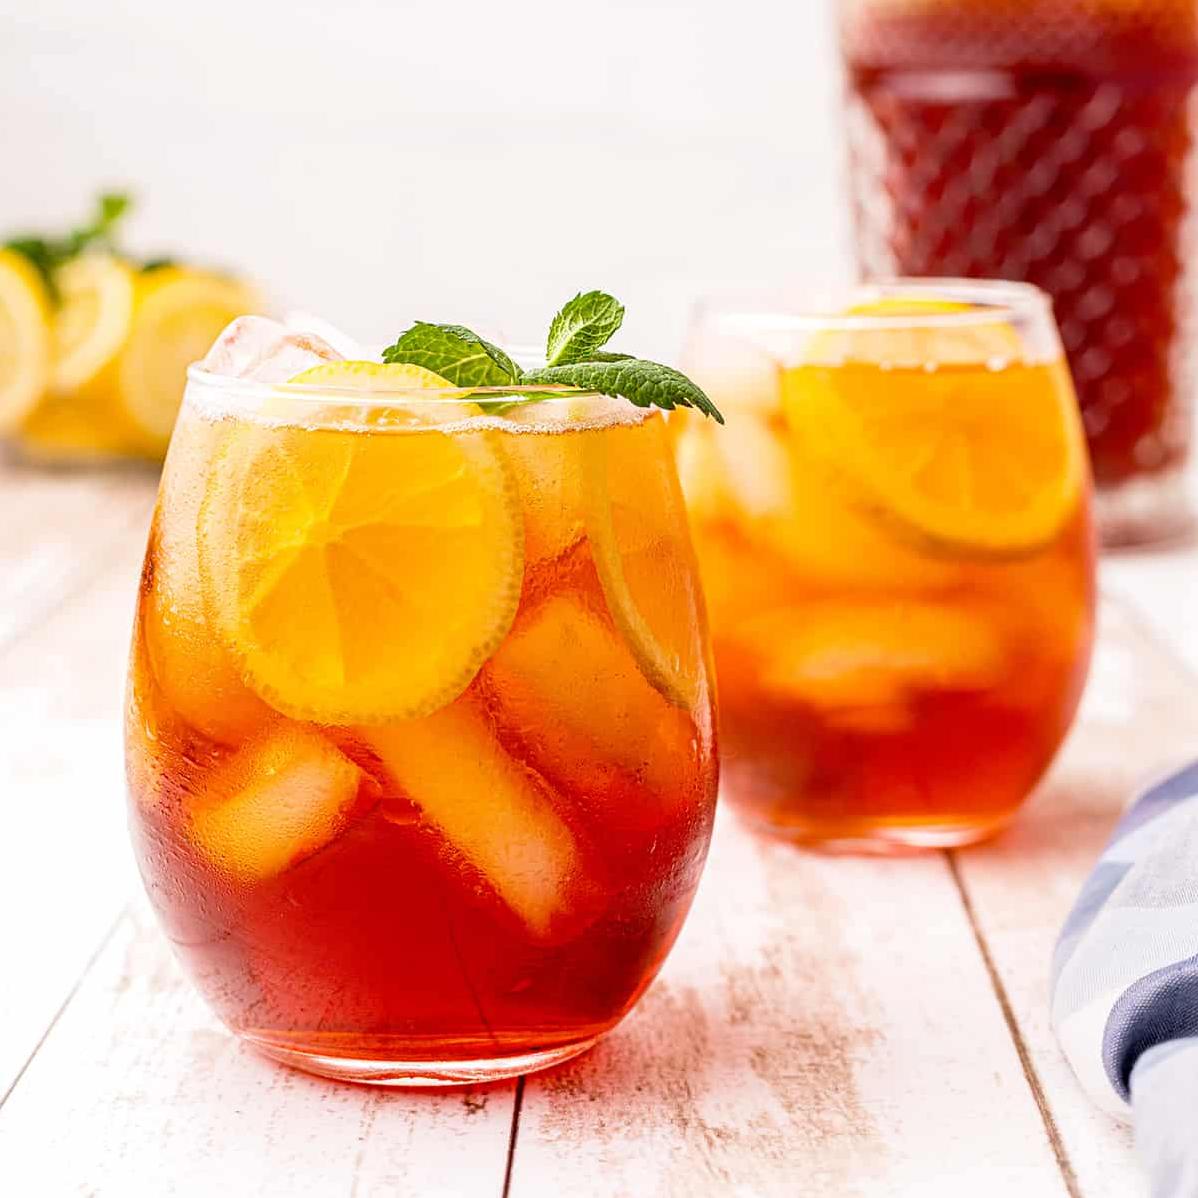  A sip of this southern iced tea is like a warm hug from your grandma on a hot day.